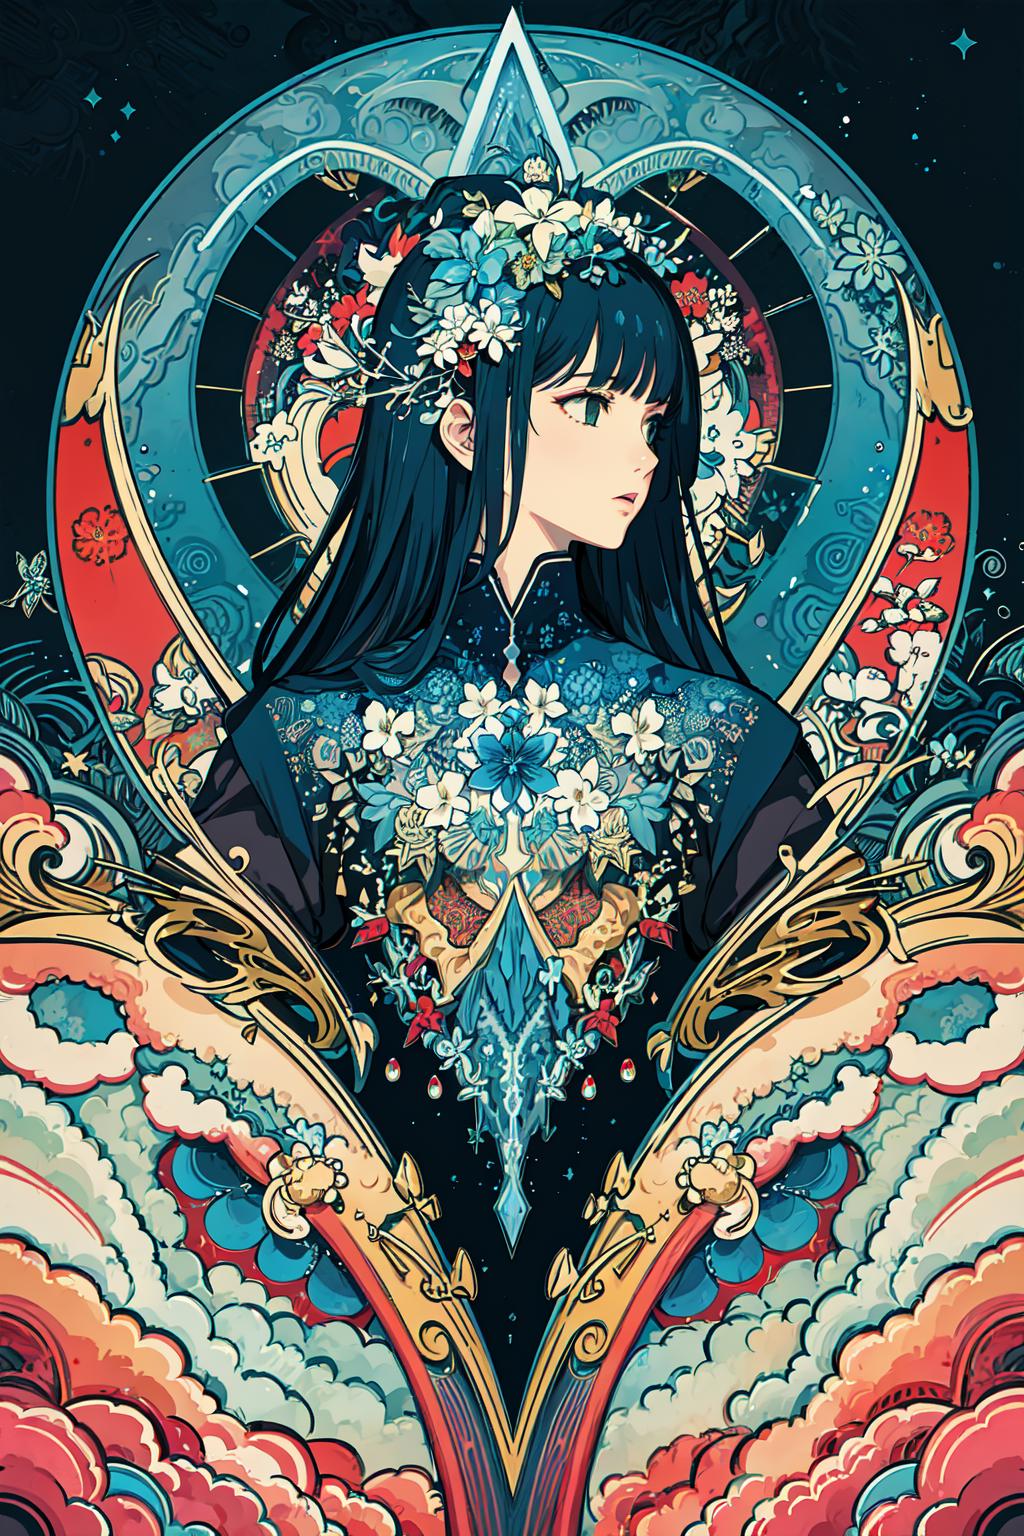 A woman in a black dress with white flowers and red accents, surrounded by a colorful and intricate design.